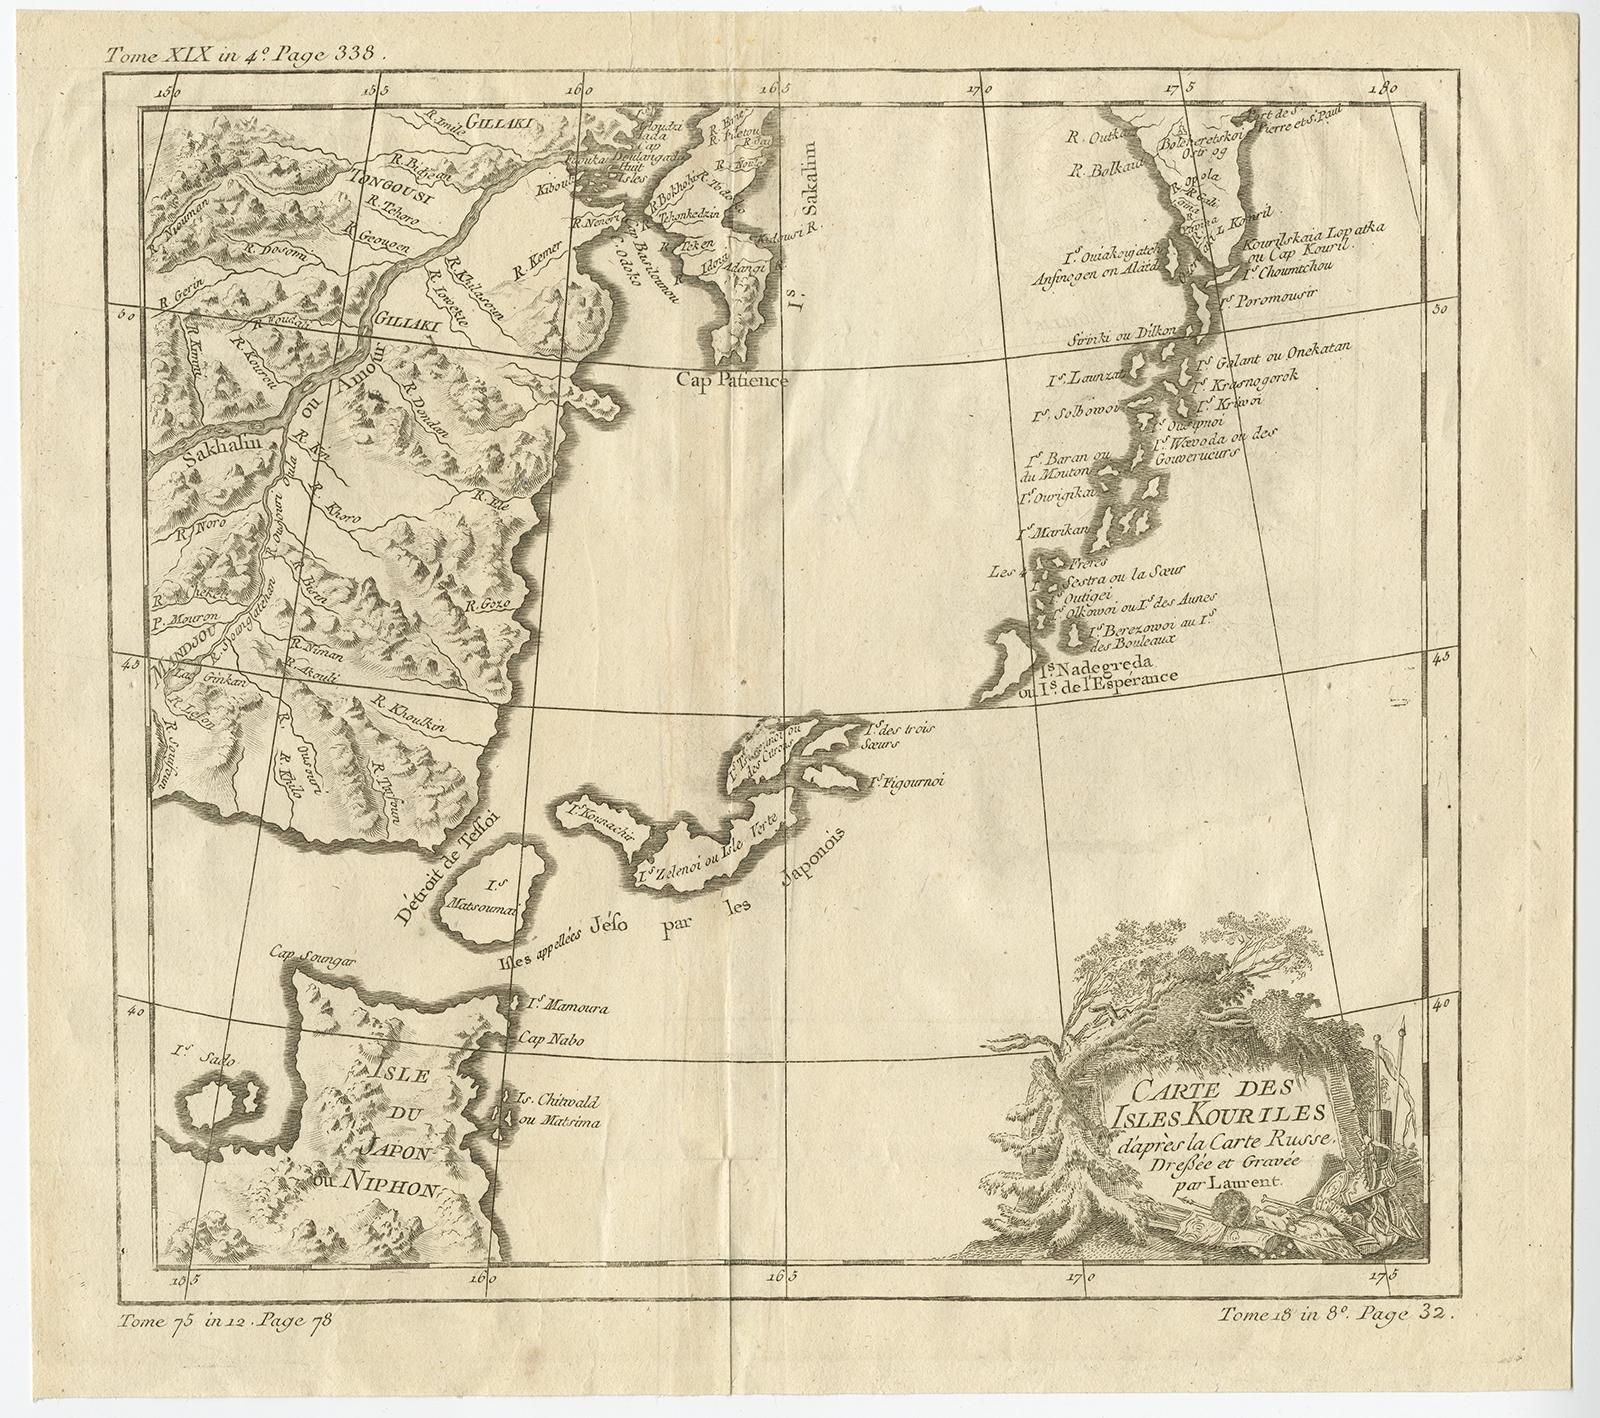 Antique map titled 'Carte des Iles Kouriles'. Original antique map of the Kuril Islands. 

The Kuril Islands or Kurile Islands are a volcanic archipelago that stretches approximately 1,300 km (810 mi) northeast from Hokkaido, Japan, to Kamchatka,